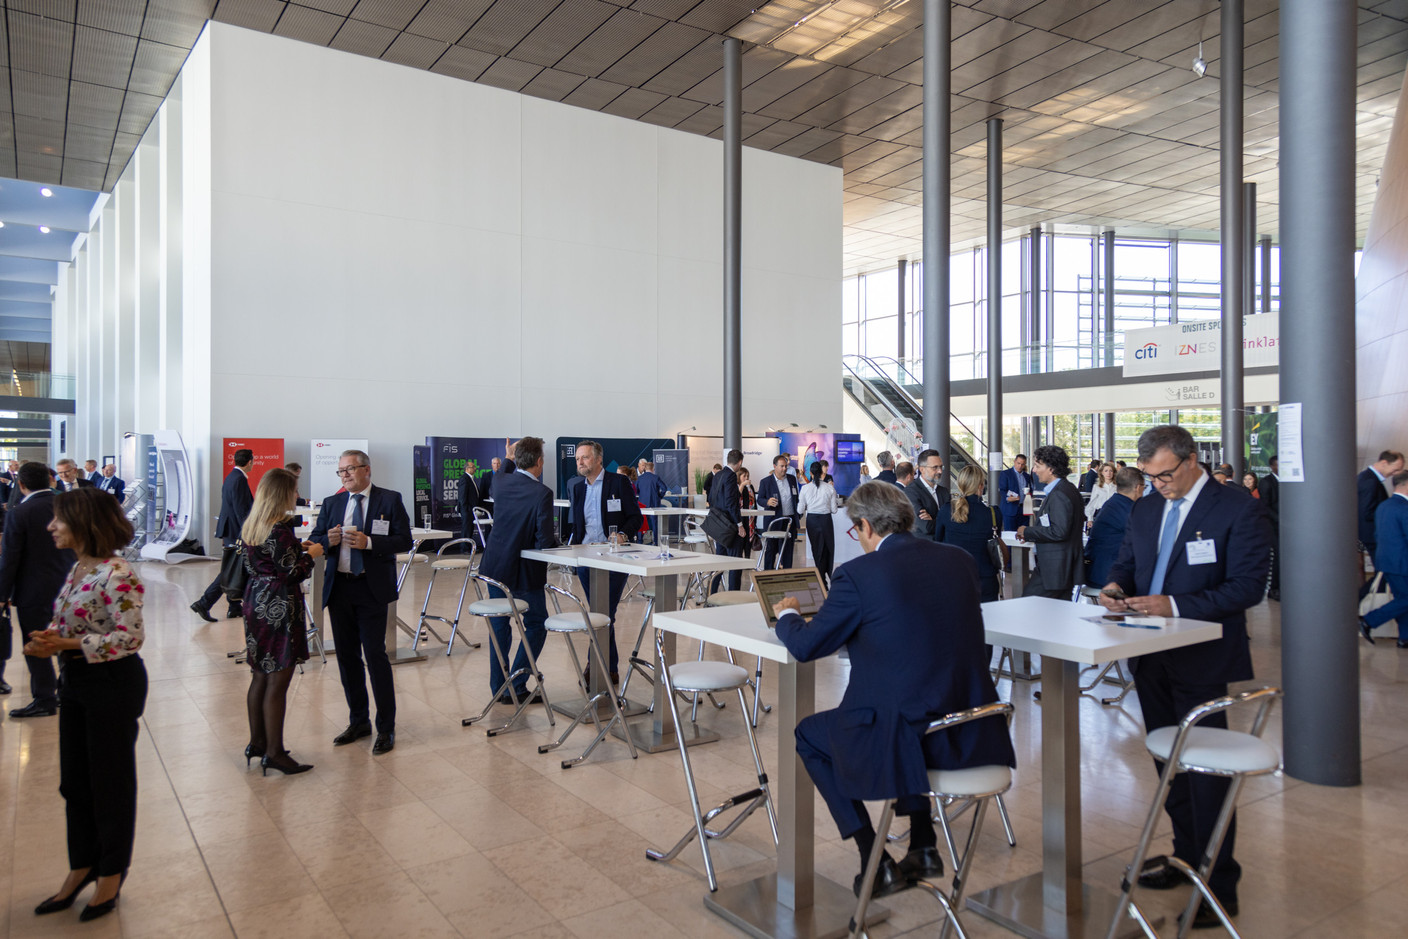 The Association of the Luxembourg Fund Industry’s Global Distribution Conference was held at the European Convention Centre in Kirchberg, 20-21 September 2022. Photo: Romain Gamba/Maison Moderne